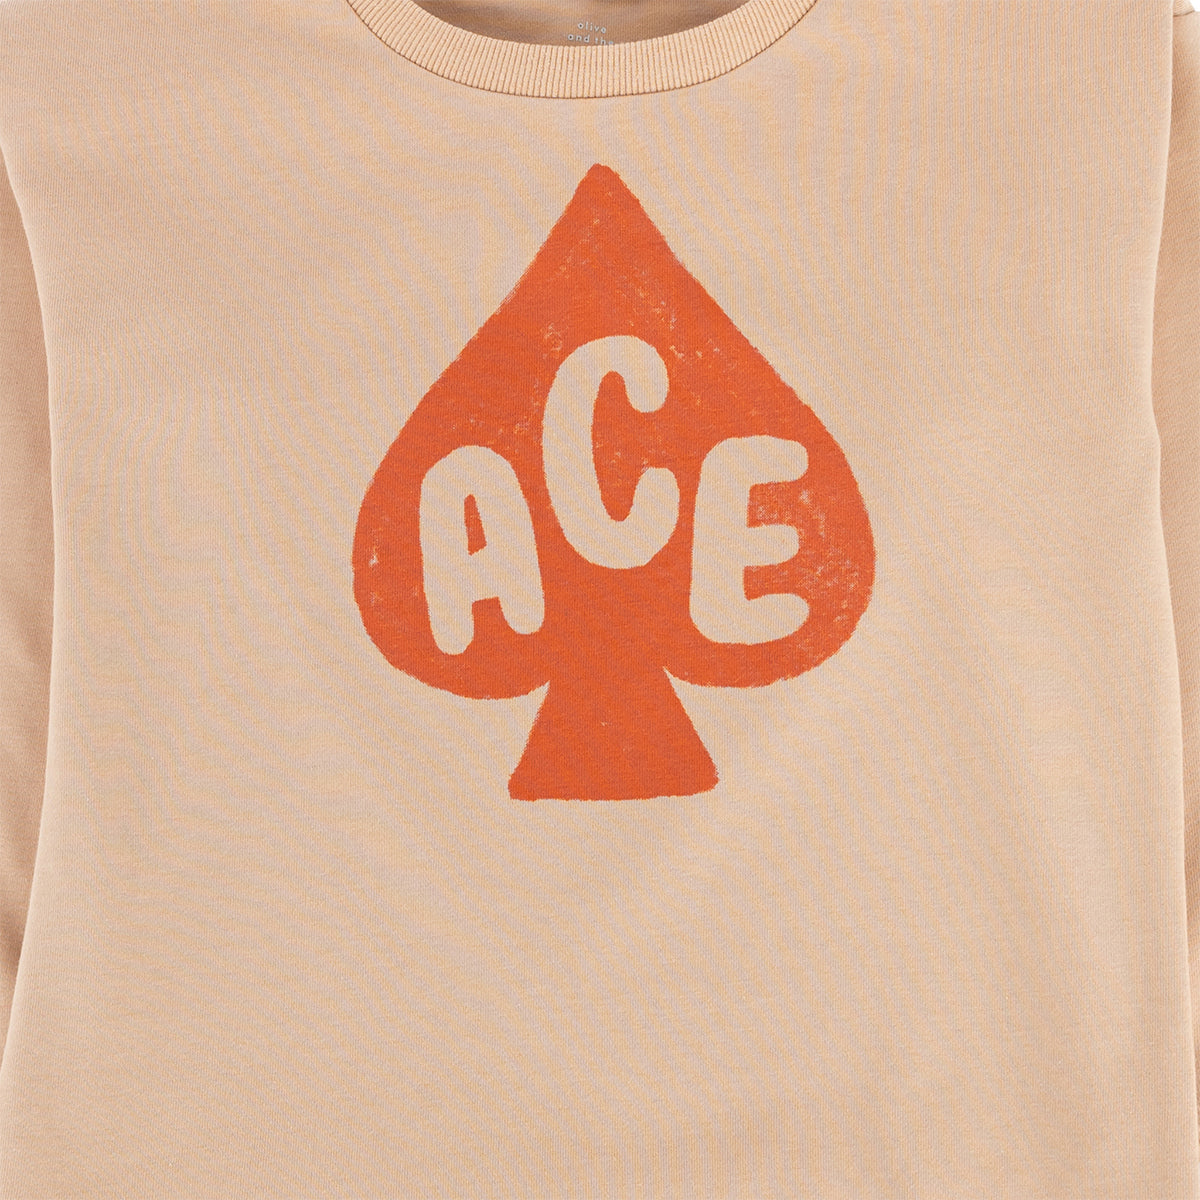 Ace of Spades Sweater Bisque